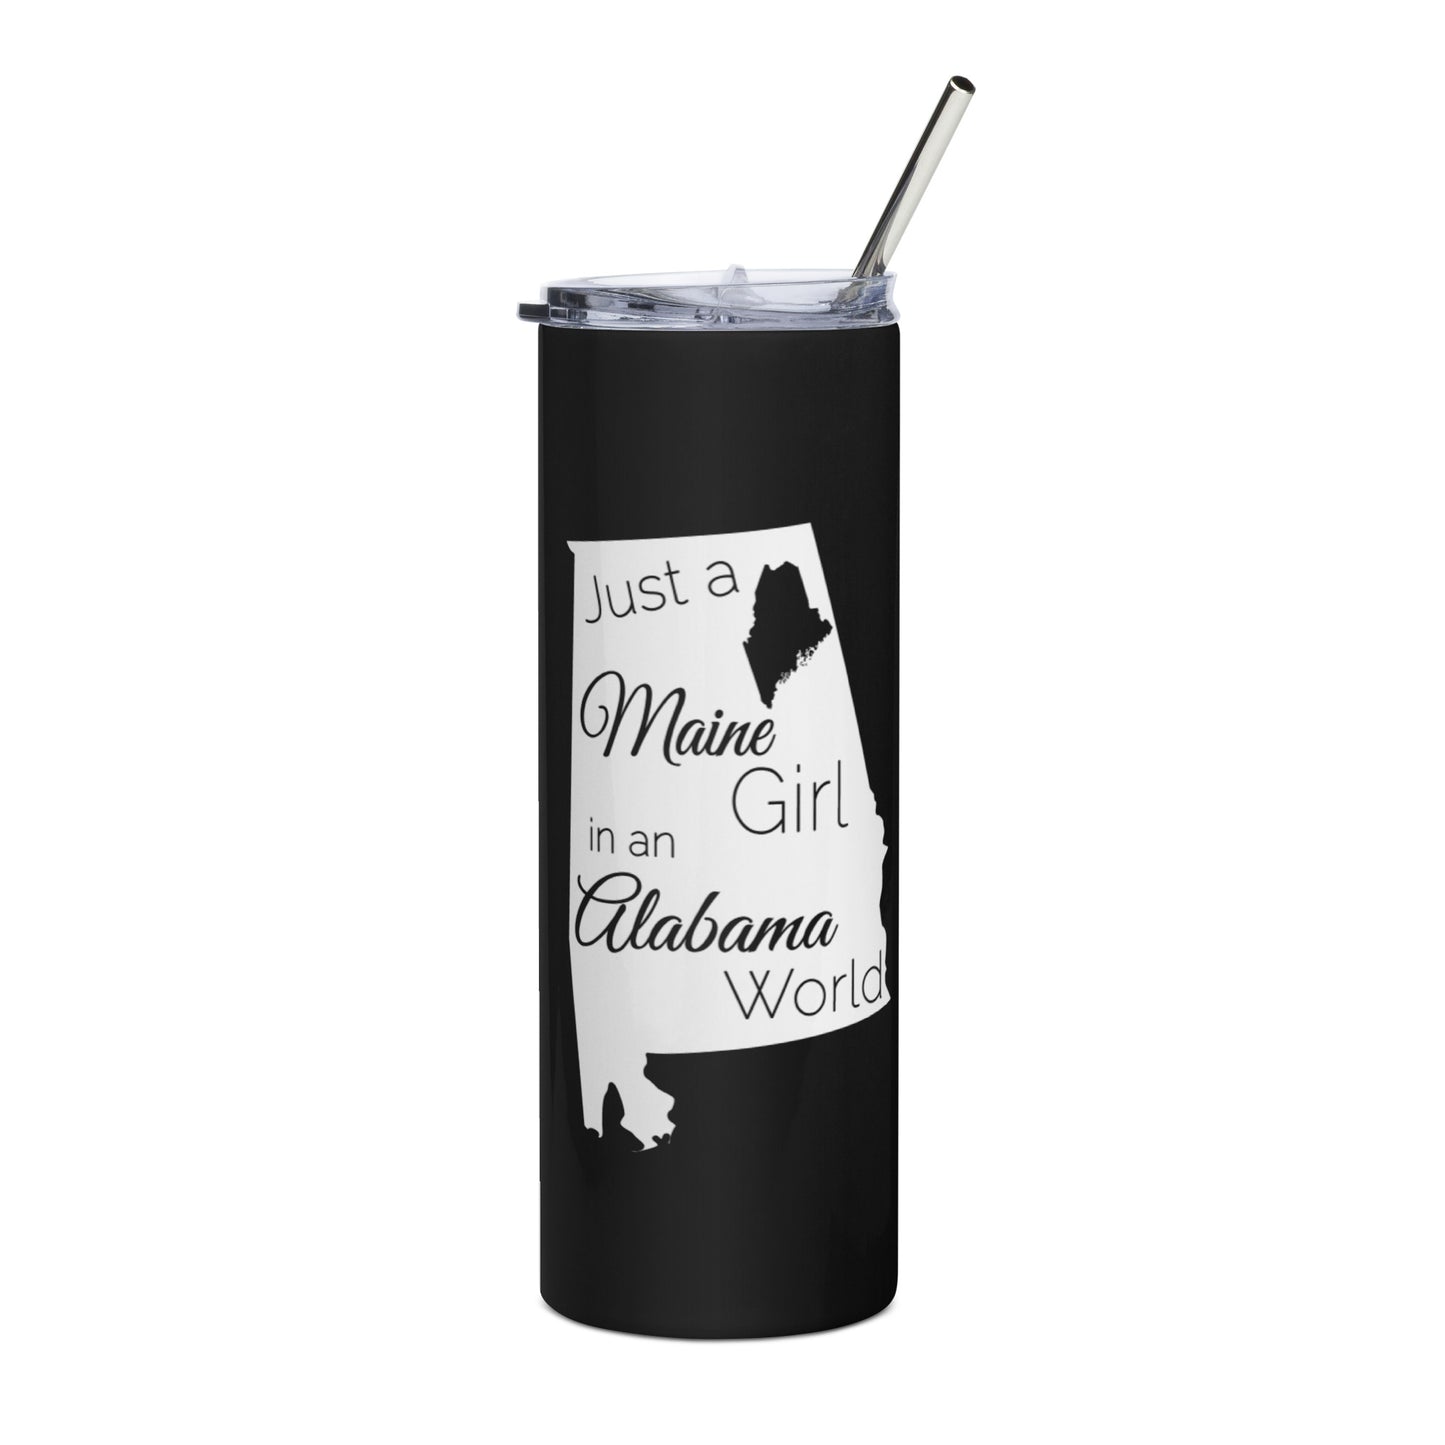 Just a Maine Girl in an Alabama World Stainless steel tumbler